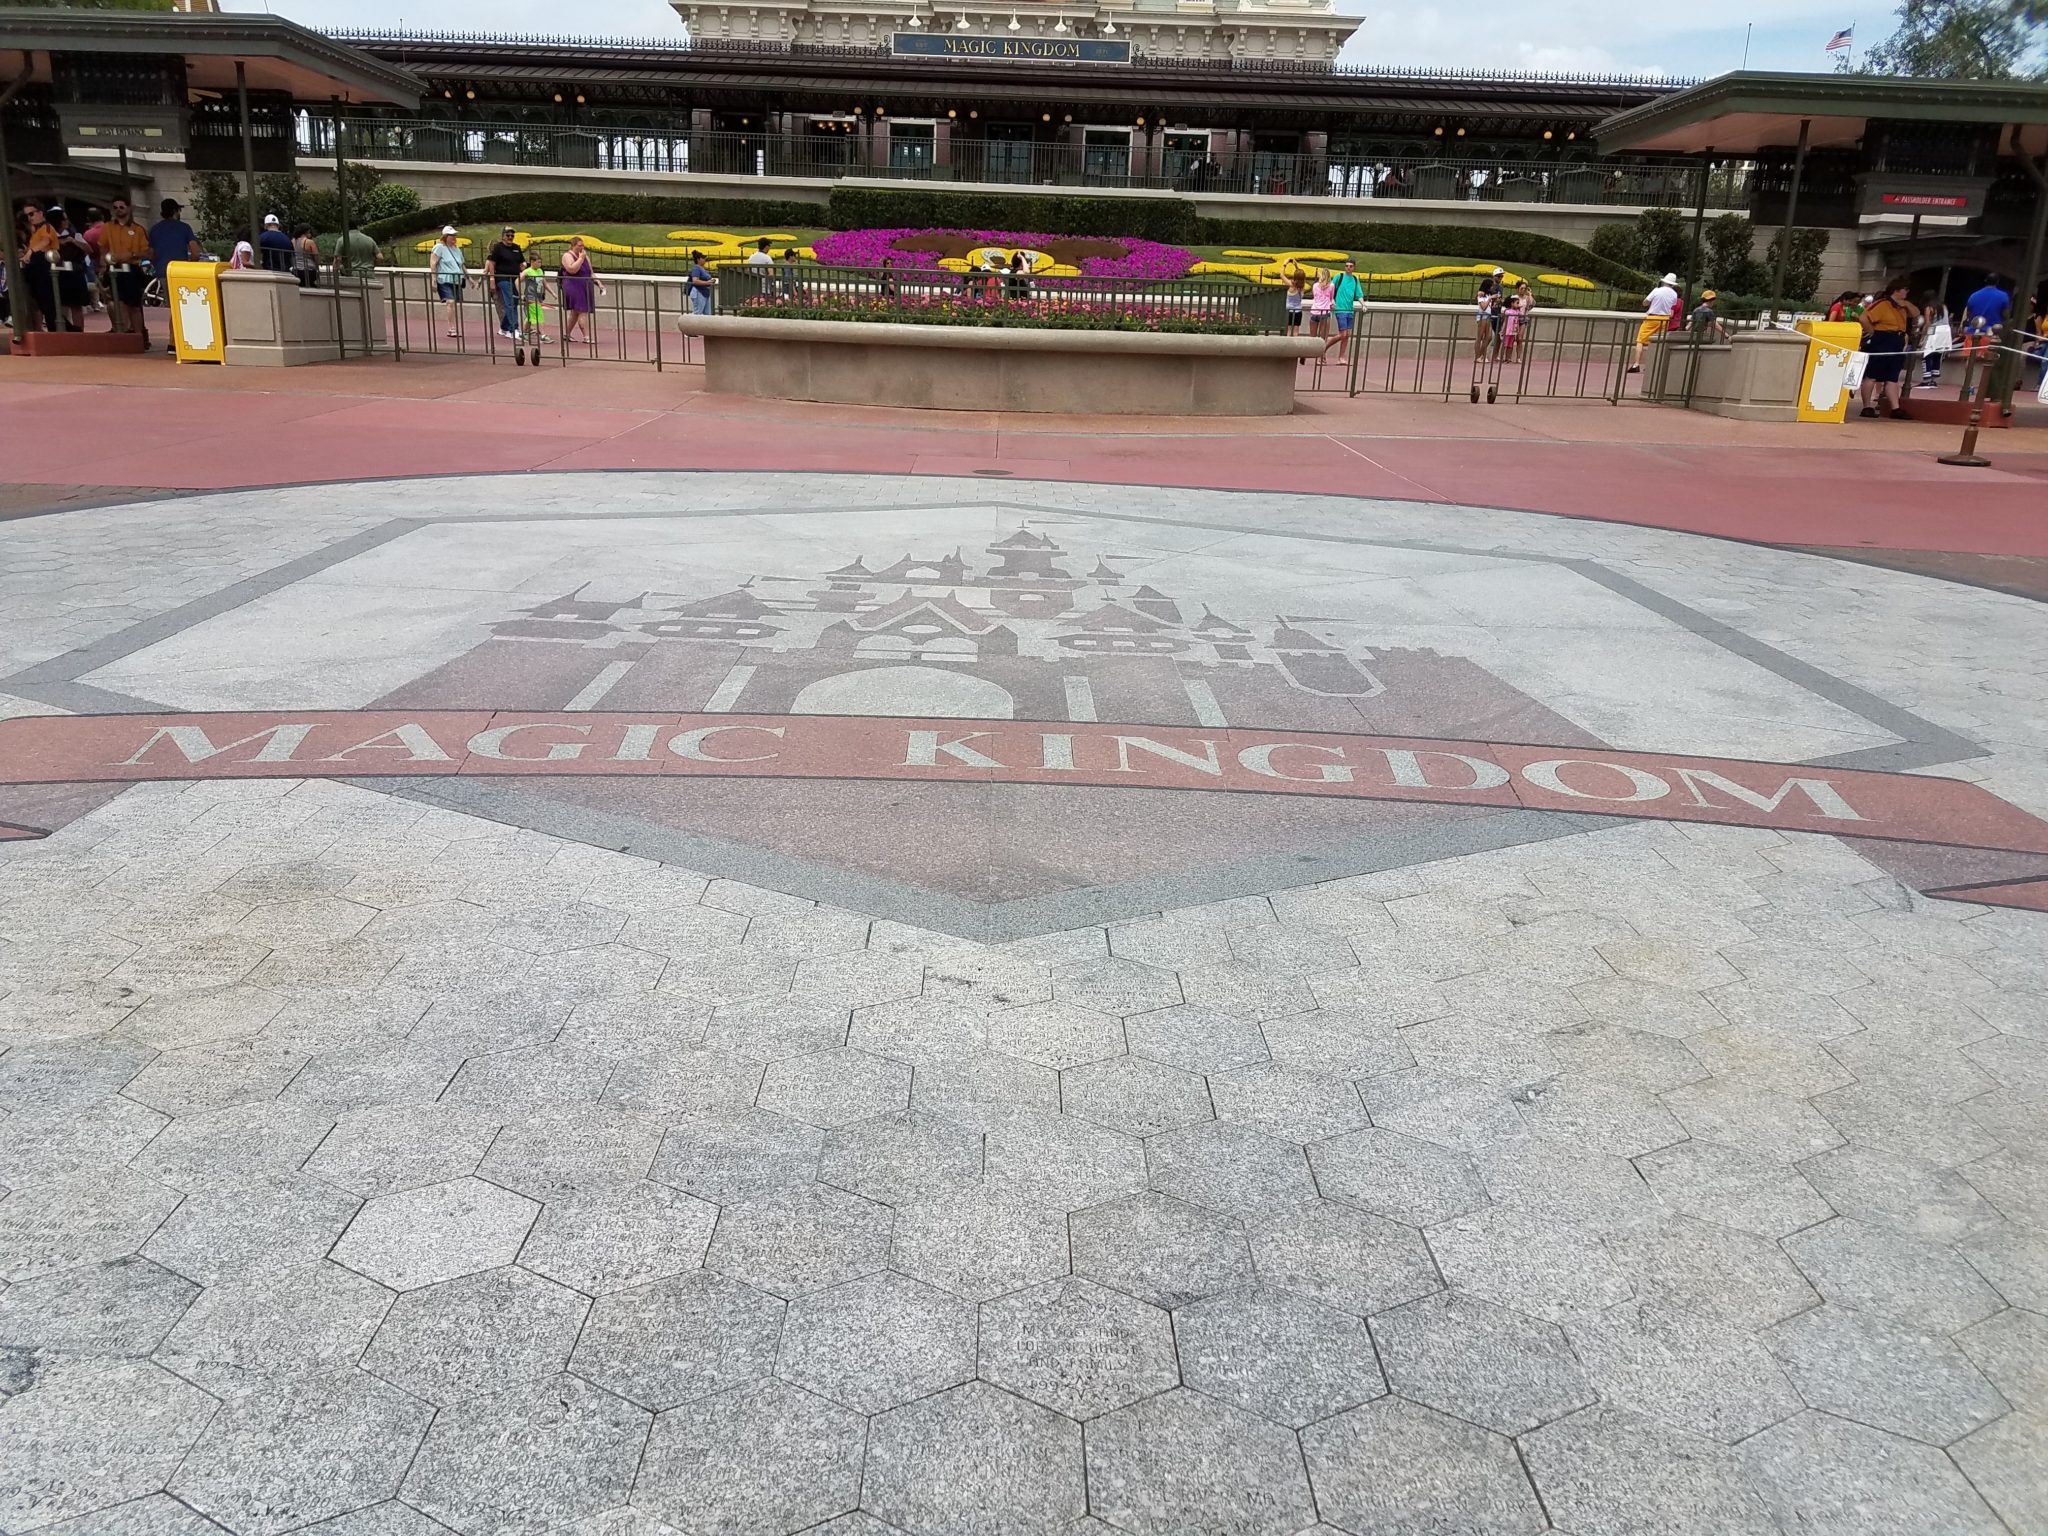 The Picture-Perfect View of Walt Disney World’s Magic Kingdom Entrance